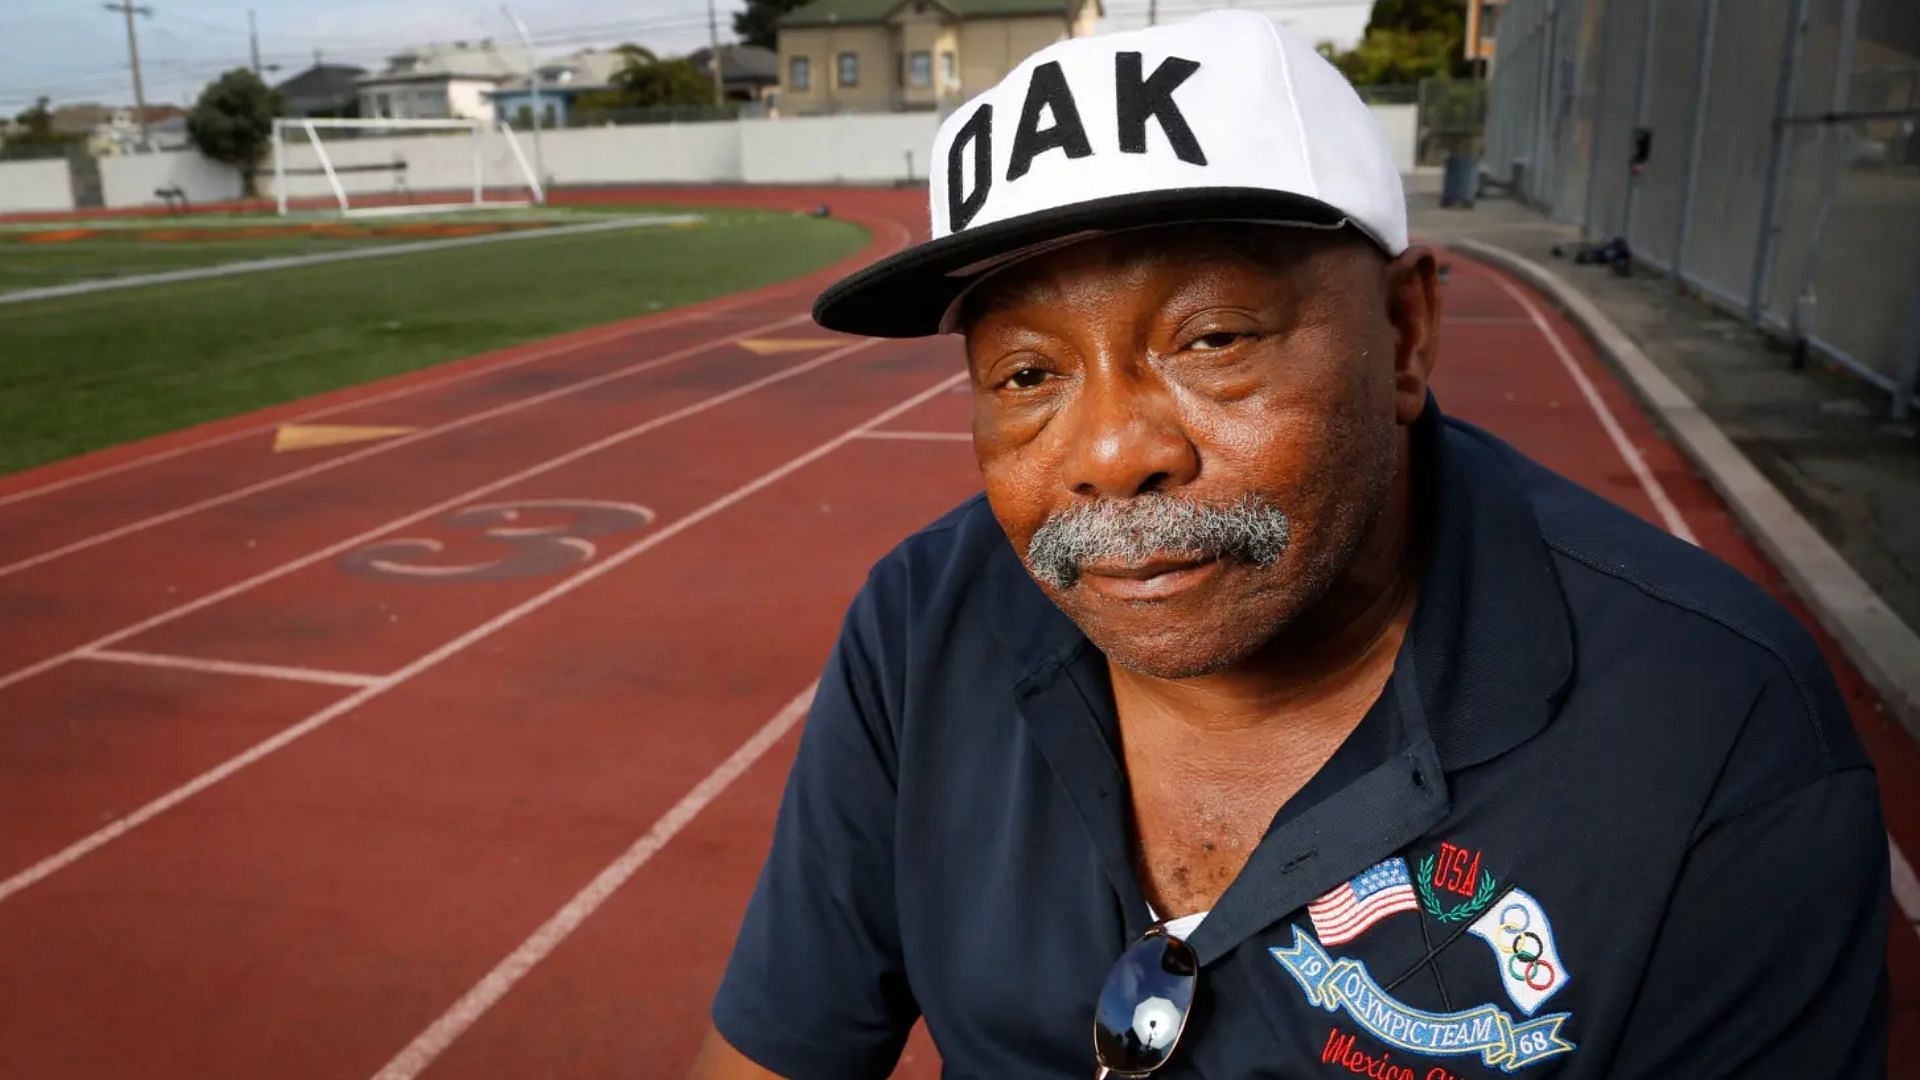 In 2016, Jim Hines posed at his alma mater, McClymonds High School in Oakland, California. (Image credit: MediaNewsGroup via Getty Images)